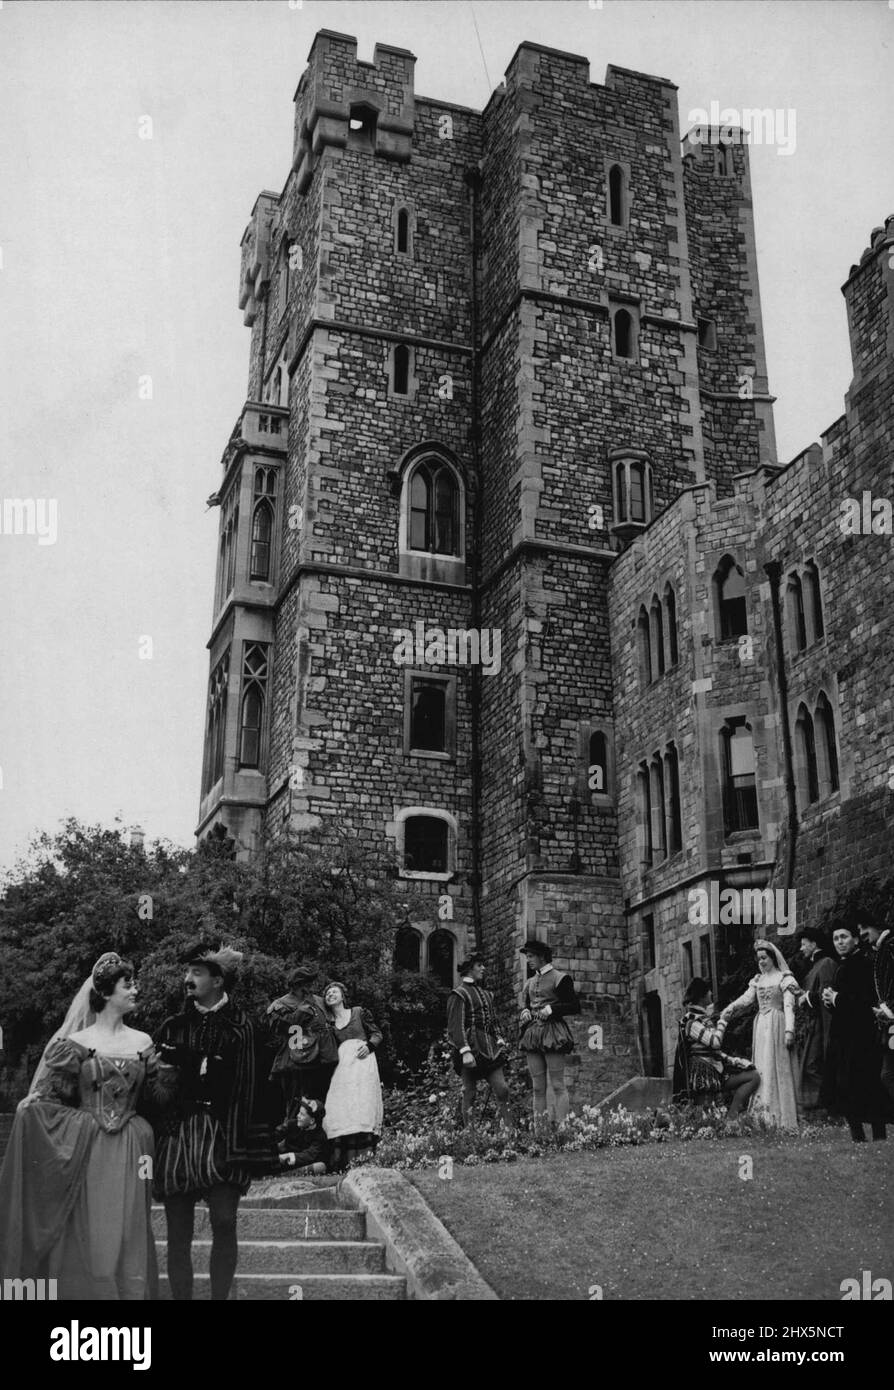 'The Merry Wives Of Windsor' To be Staged In Windsor Castle Setting -- A general view of the play's setting with part of Windsor castle in the background. The Windsor theater guild, of which dame Sybil Thorndike is president, to-day held a dress rehearsal of the performance which they are giving August 2nd, 3rd, and 4th, of Shakespeare's 'Merry Wives Of Windsor'. It is a Windsor festival production and will be staged with Windsor Castle as a background. The tower will be floodlit and the Windsor and Eton society choir will sing madrigals. August 7, 1951. (Photo by Paul Popper Ltd.). Stock Photo